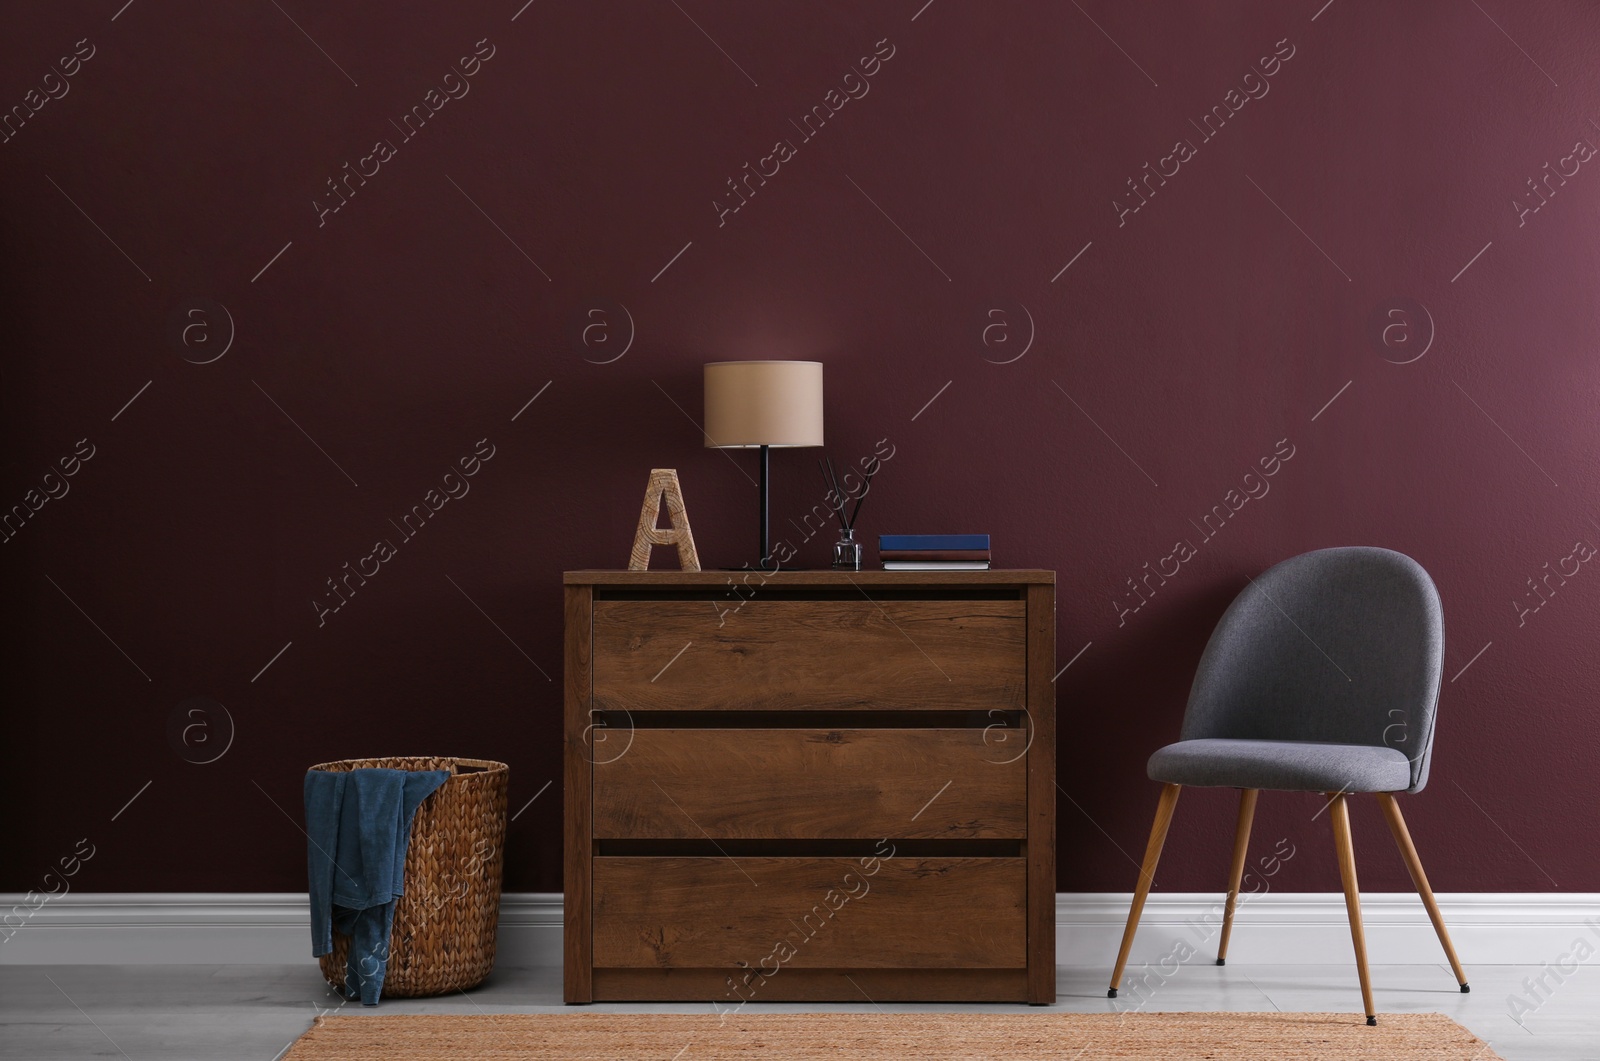 Photo of Elegant room interior with stylish chest of drawers, wicker basket and comfortable chair